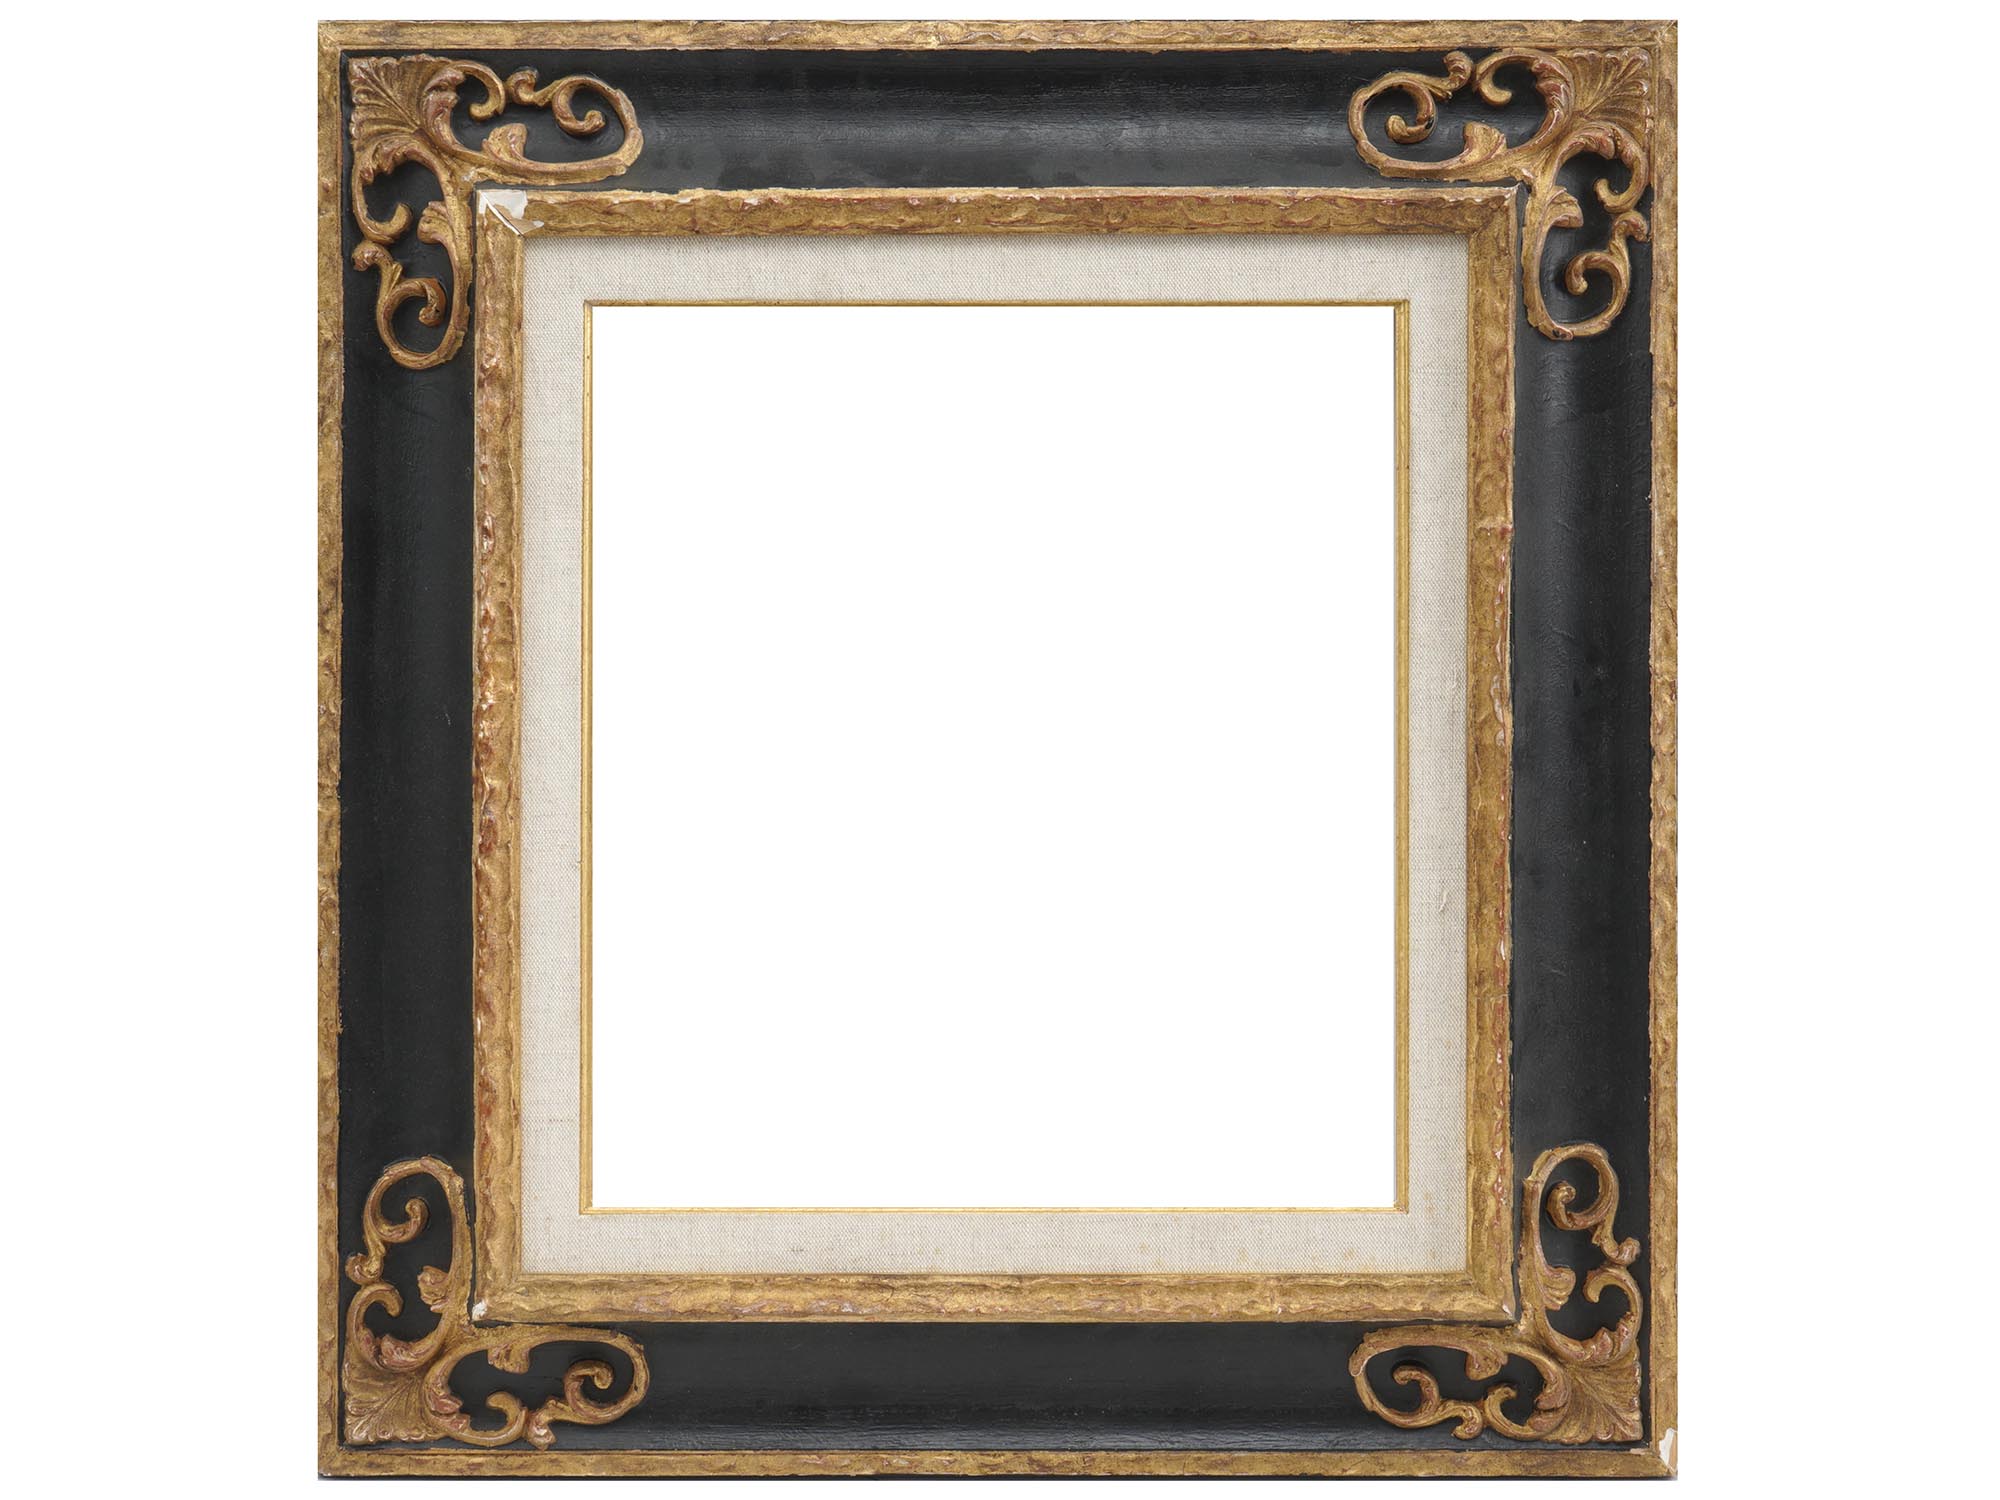 ANTIQUE CONTINENTAL CARVED PATINATED WOOD FRAMES PIC-1